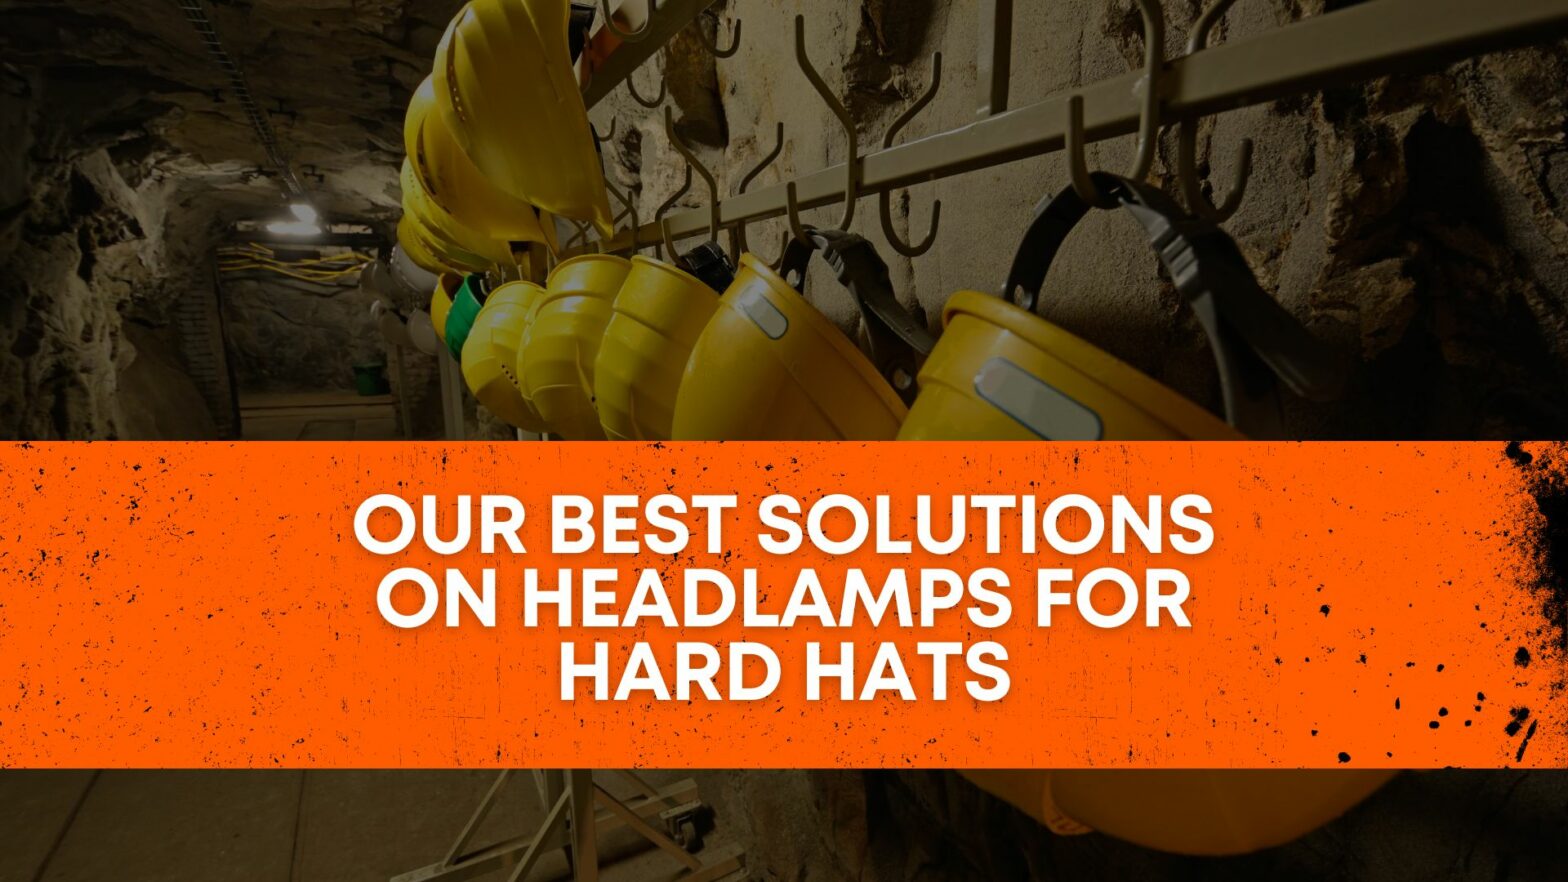 Our best solutions on headlamps for hard hats